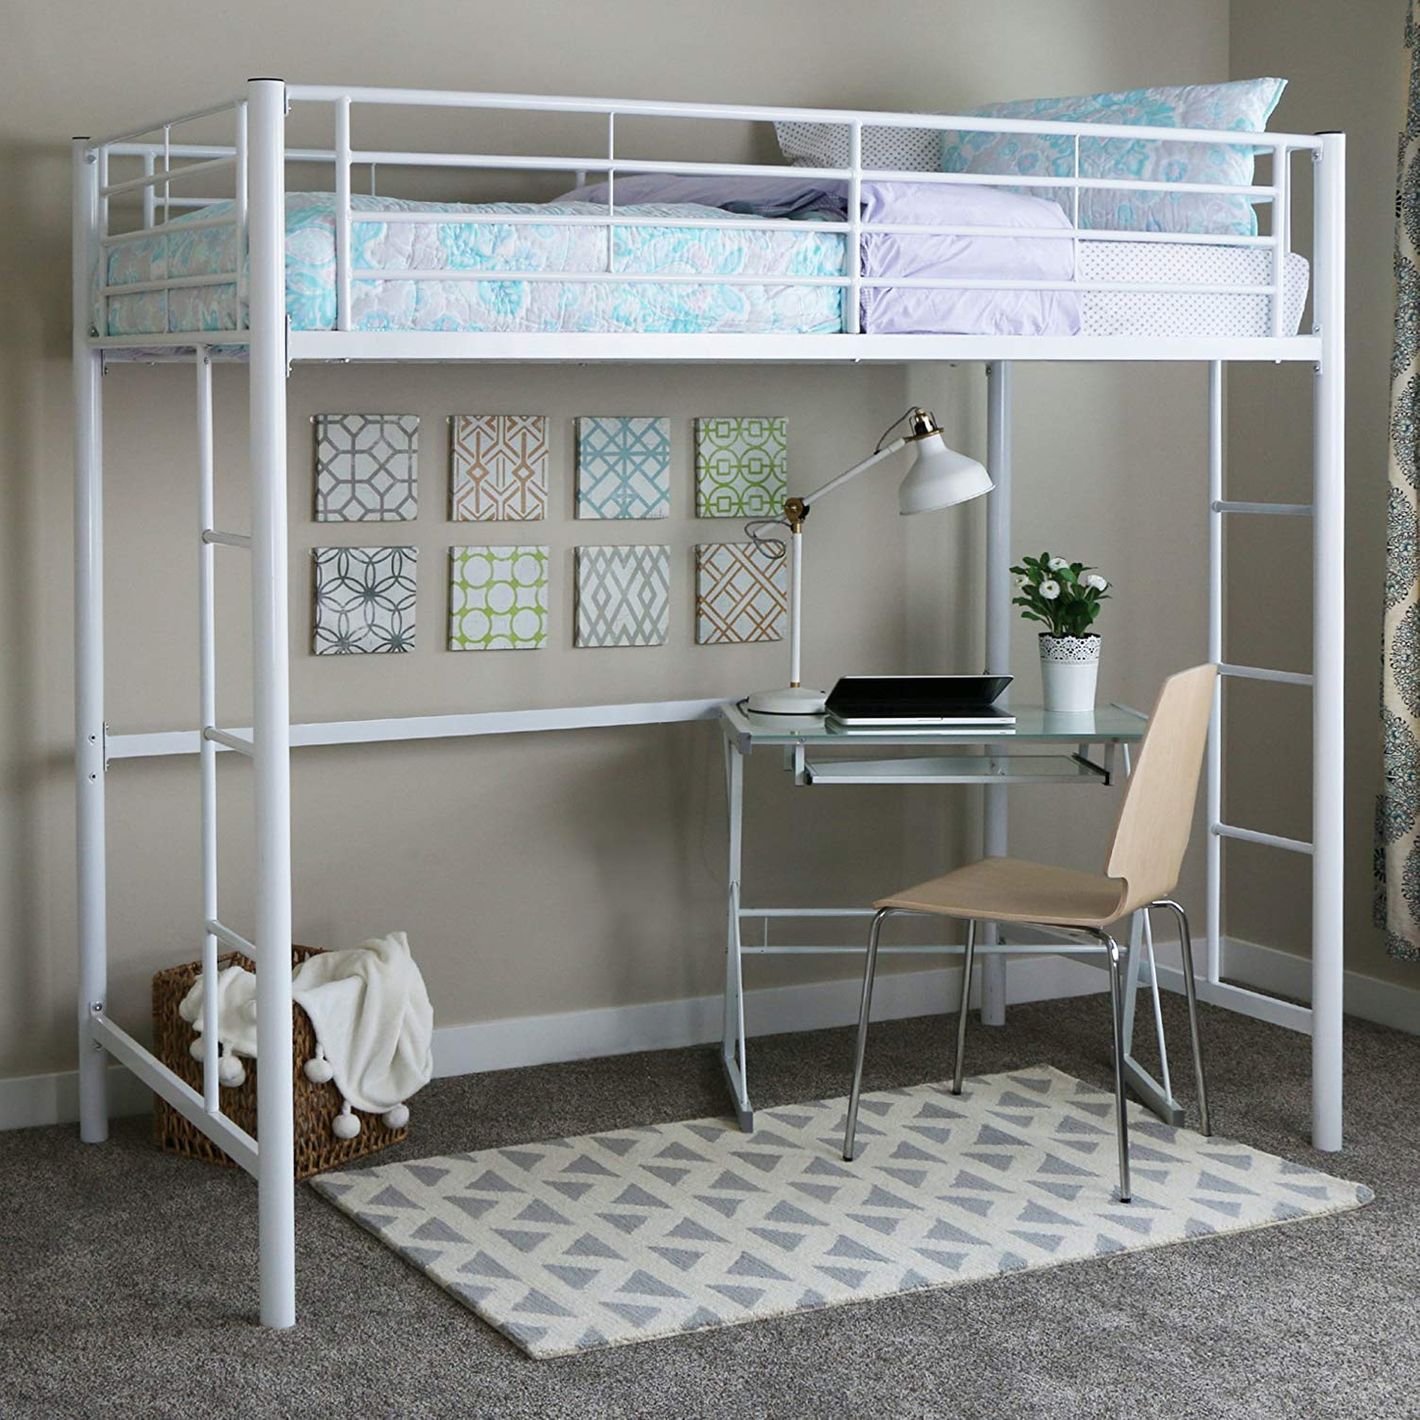 8 Best Loft Beds 2019 The Strategist, Bunk Bed Without Bottom Bunk